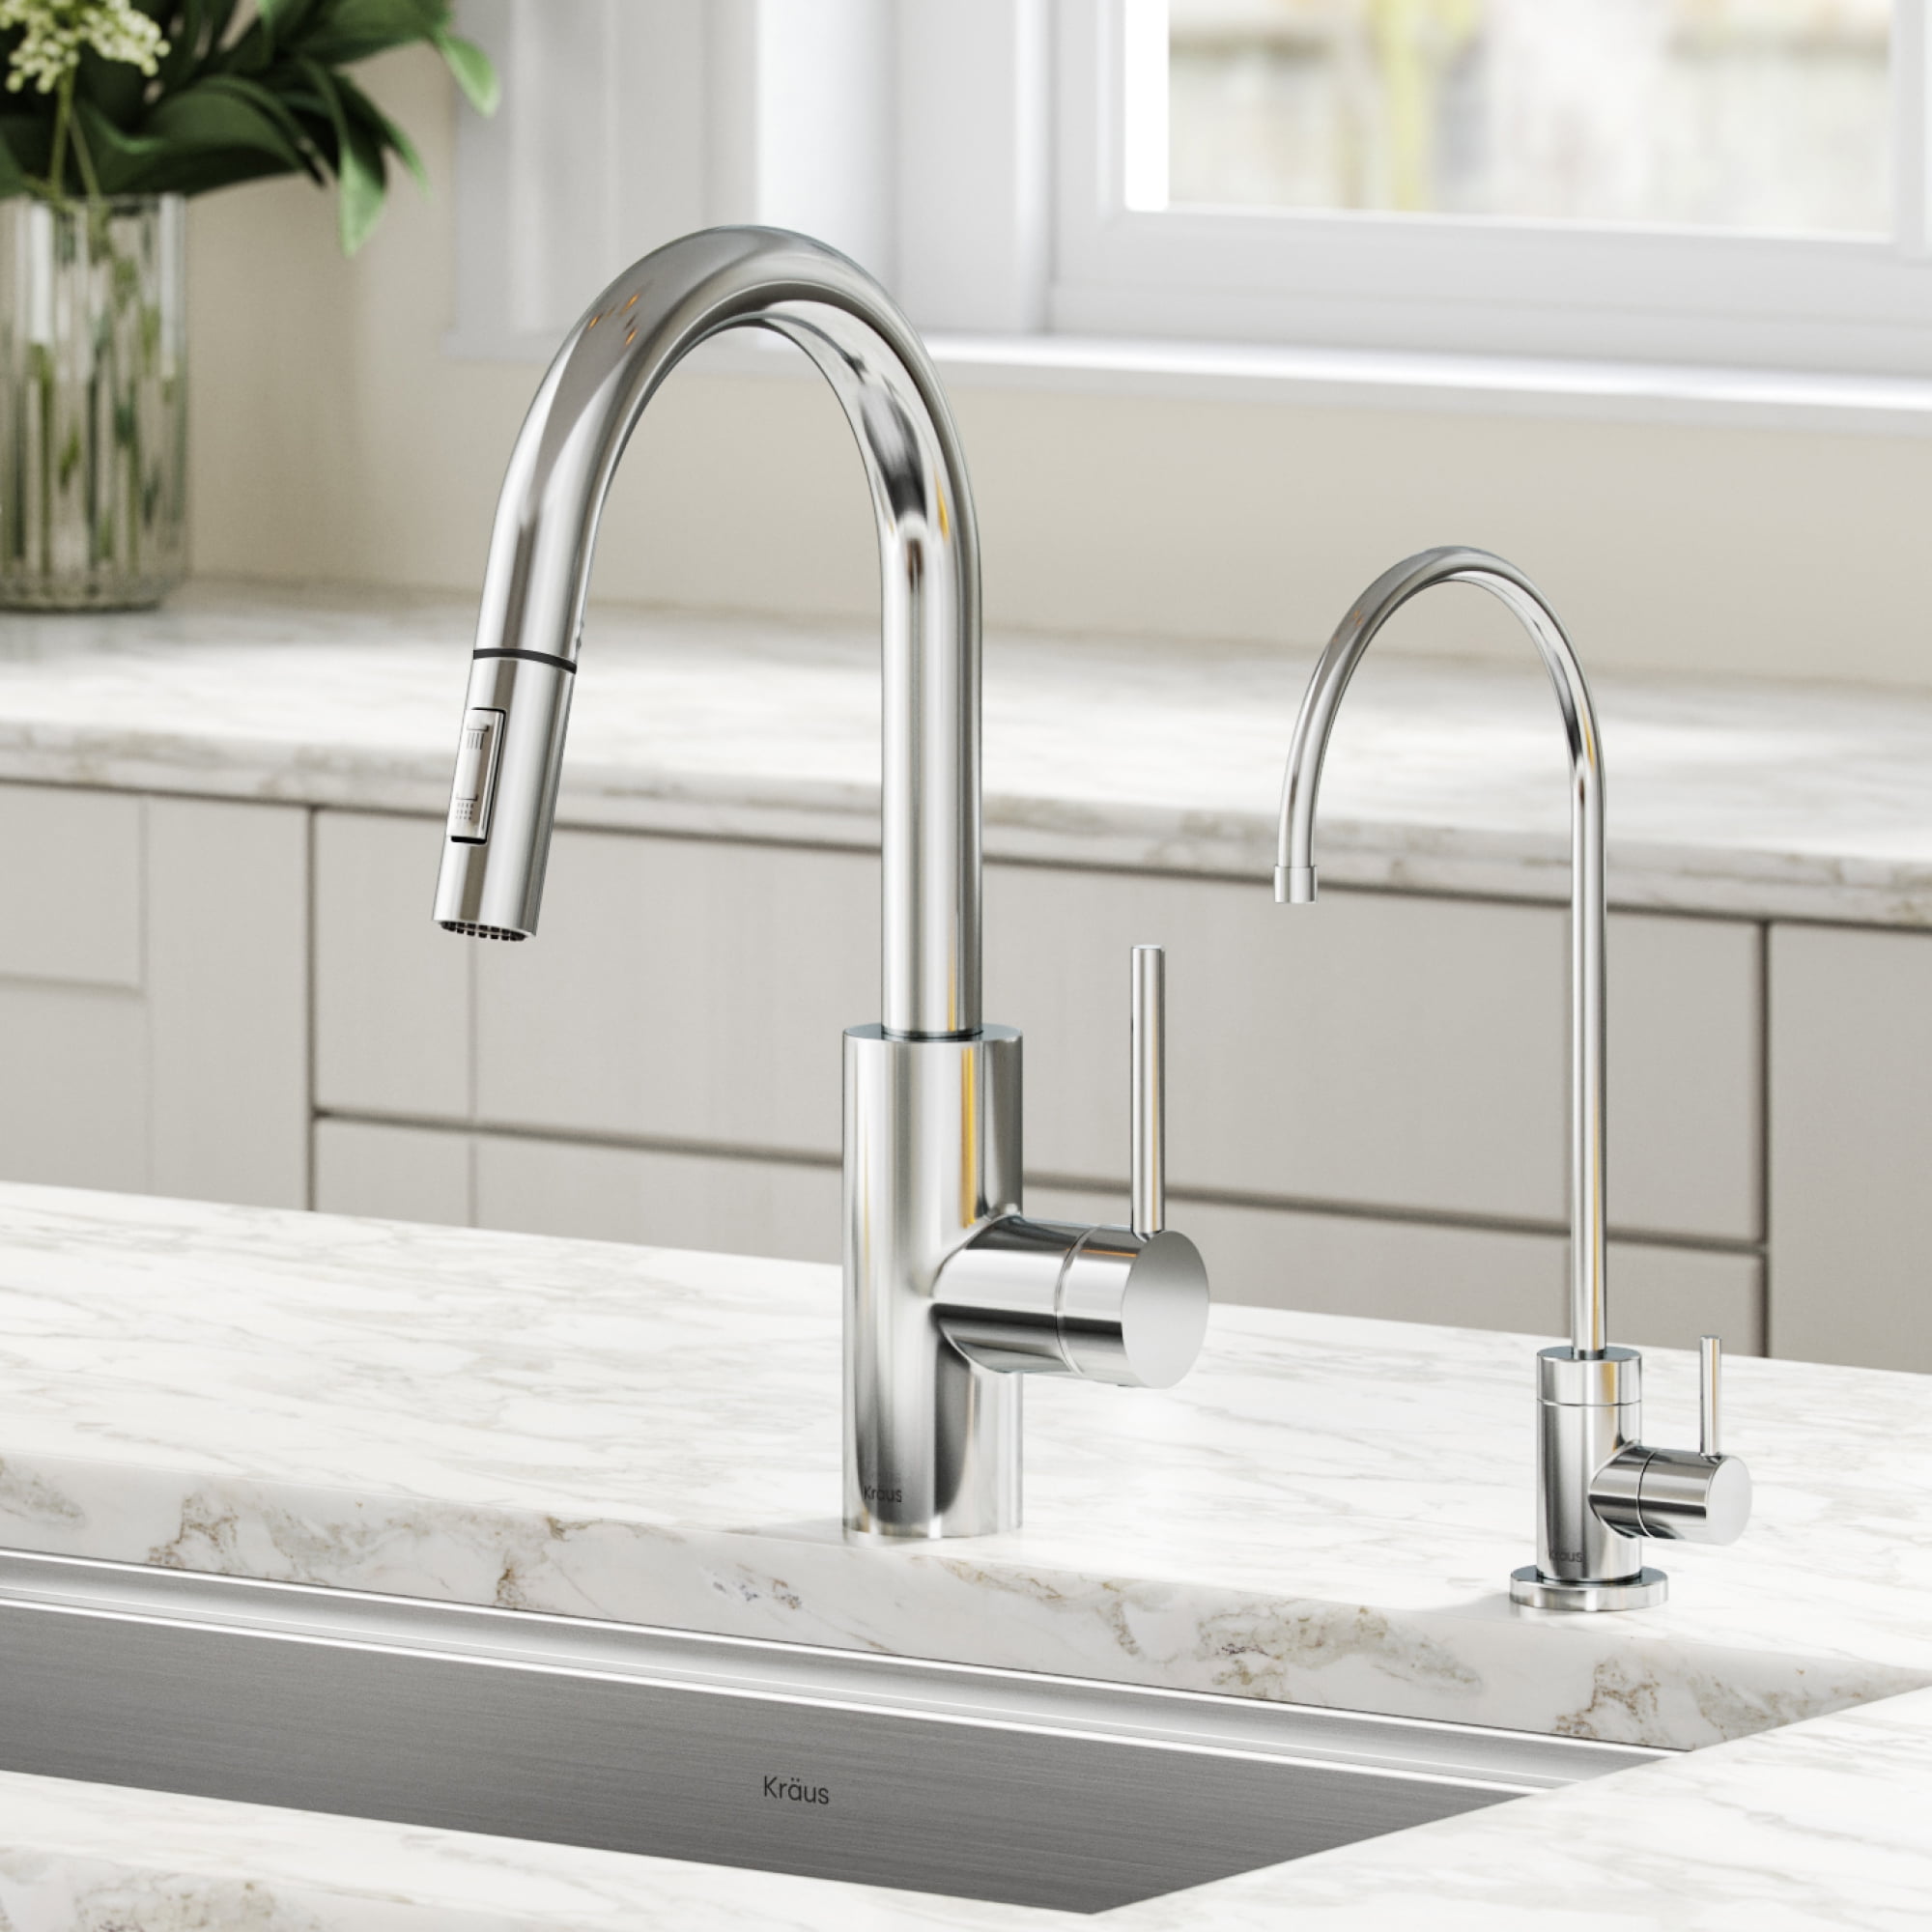 Kraus Oletto Pull Down Kitchen Faucet And Purita Water Filter Faucet Combo In Chrome Walmart Com